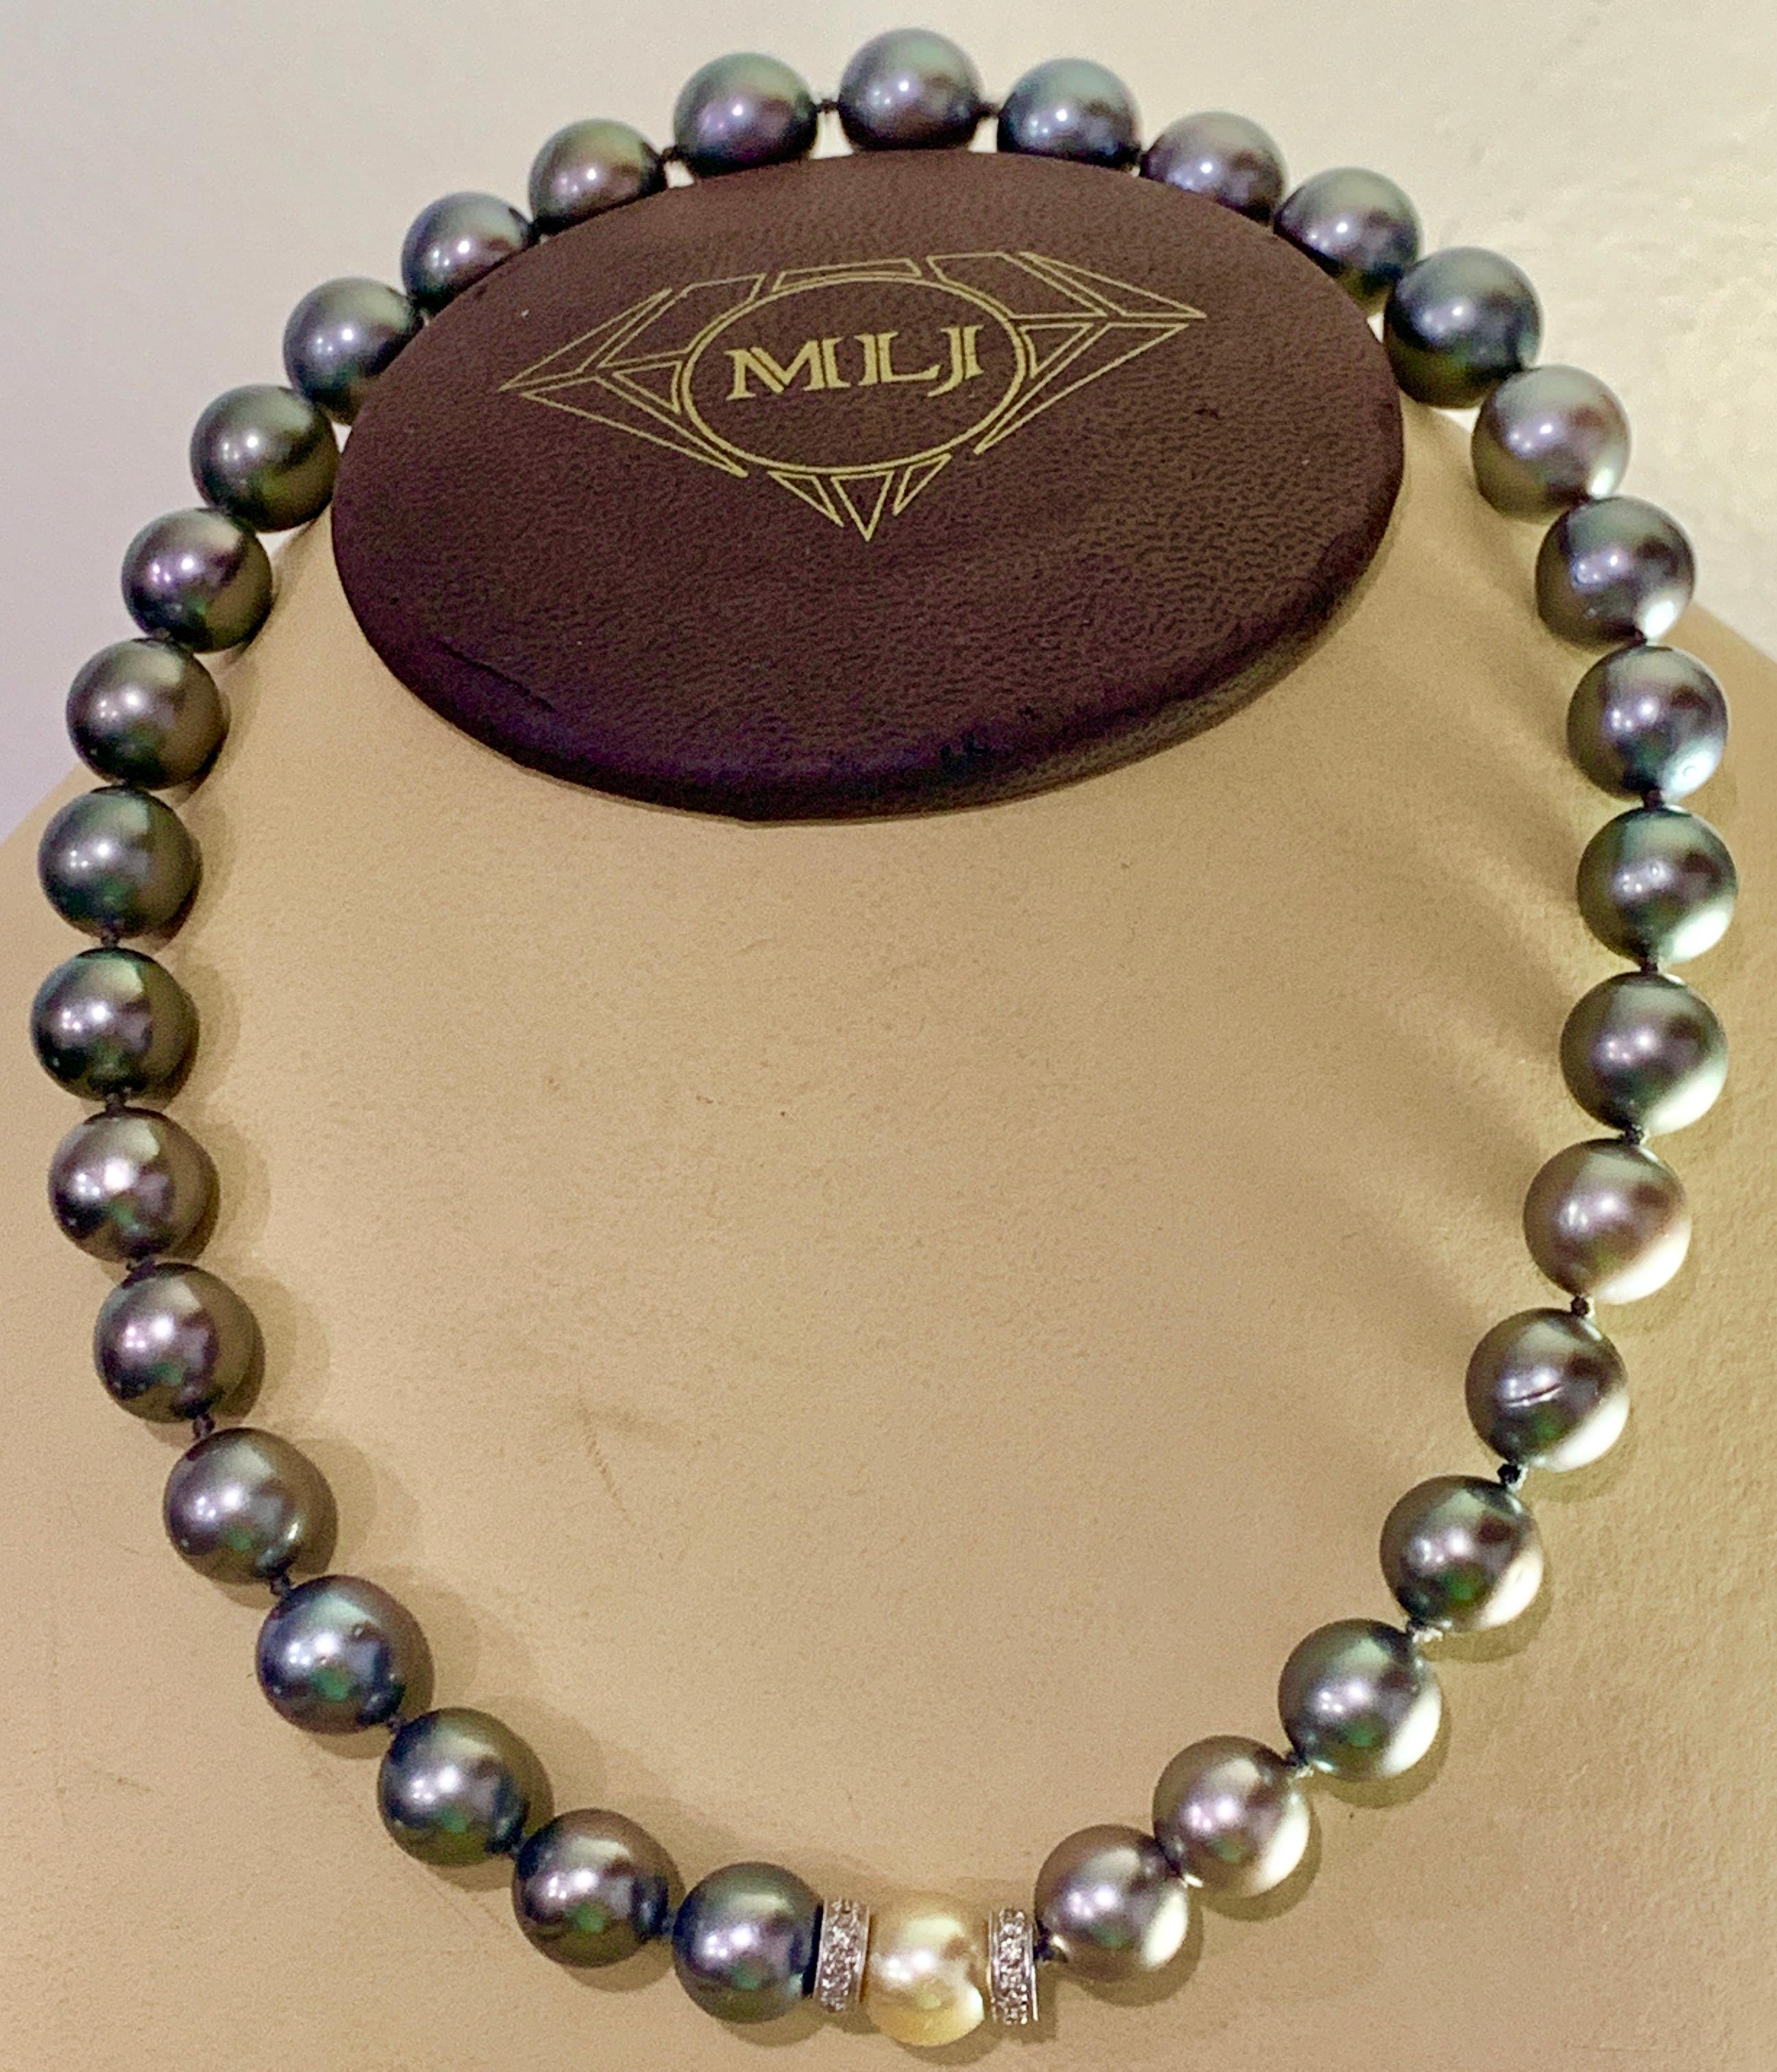 10 MM Tahitian Black Pearls Strand Necklace, Estate, 16 inch 2